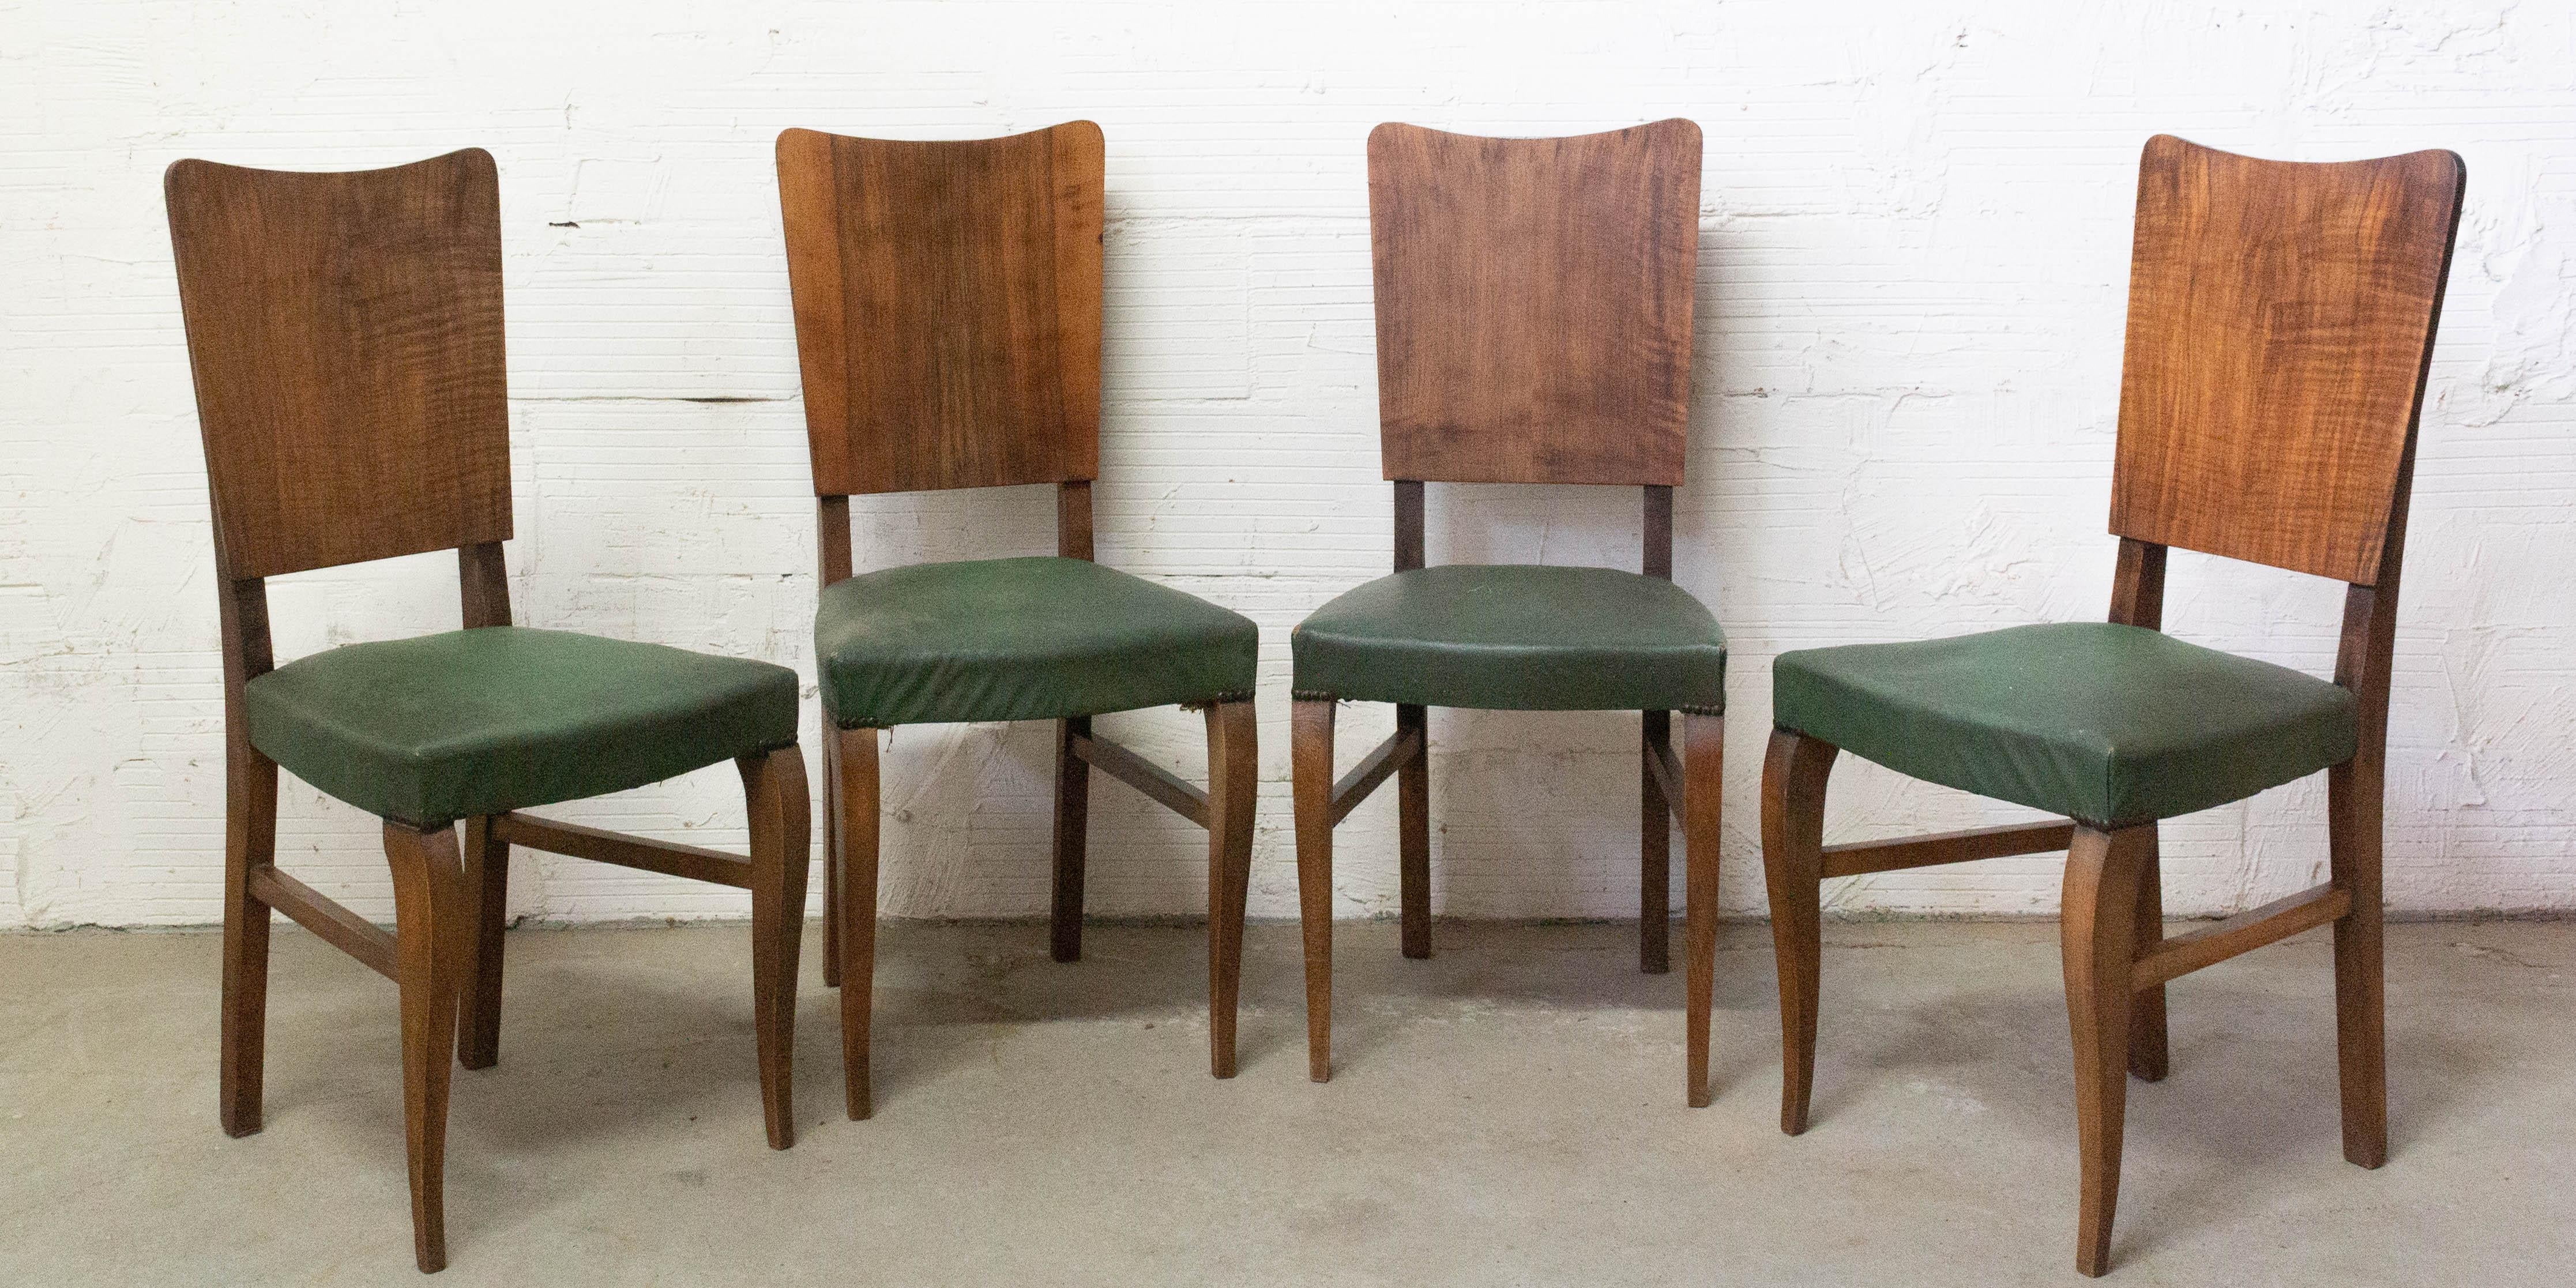 Four French dining chairs, midcentury
Beech, walnut veneer
Original vintage condition to be re-upholstered
Sound and solid.

Shipping: 
2 packs, L 43/P57/H101 kg 12.2 kg each.